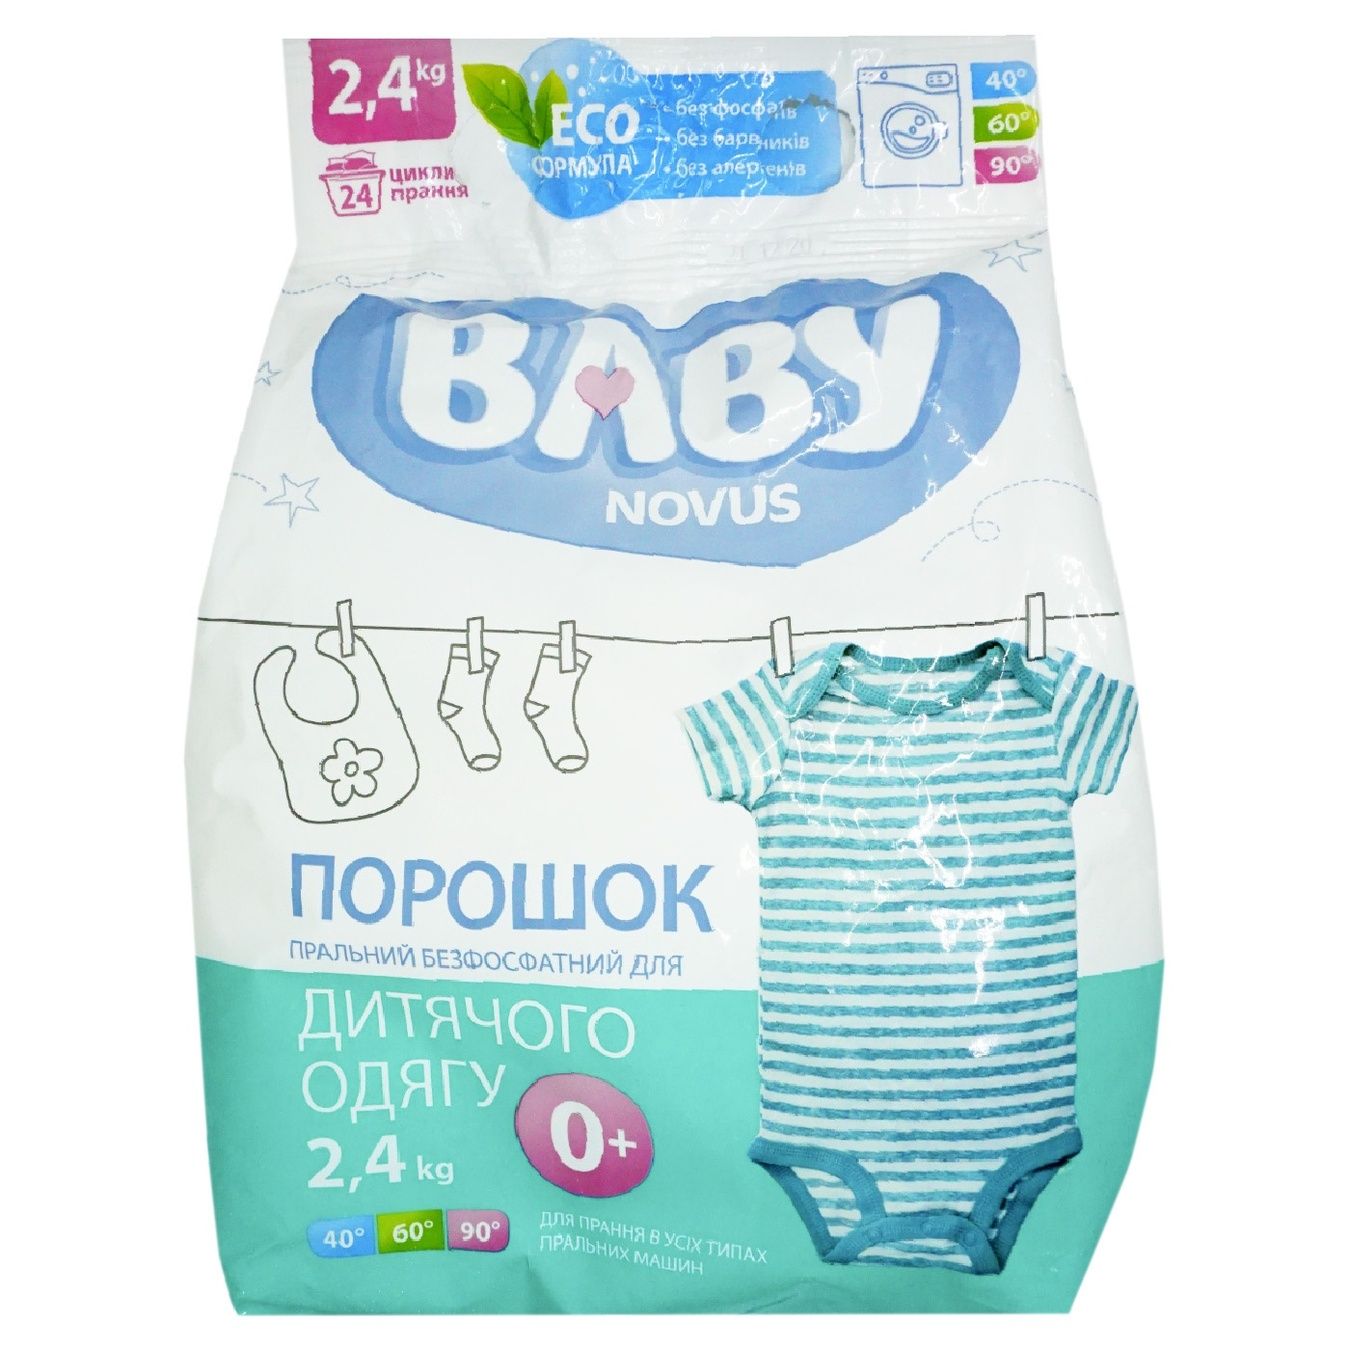 Novus Baby Phosphate-free Washing Powder for Baby Clothes 2,4kg